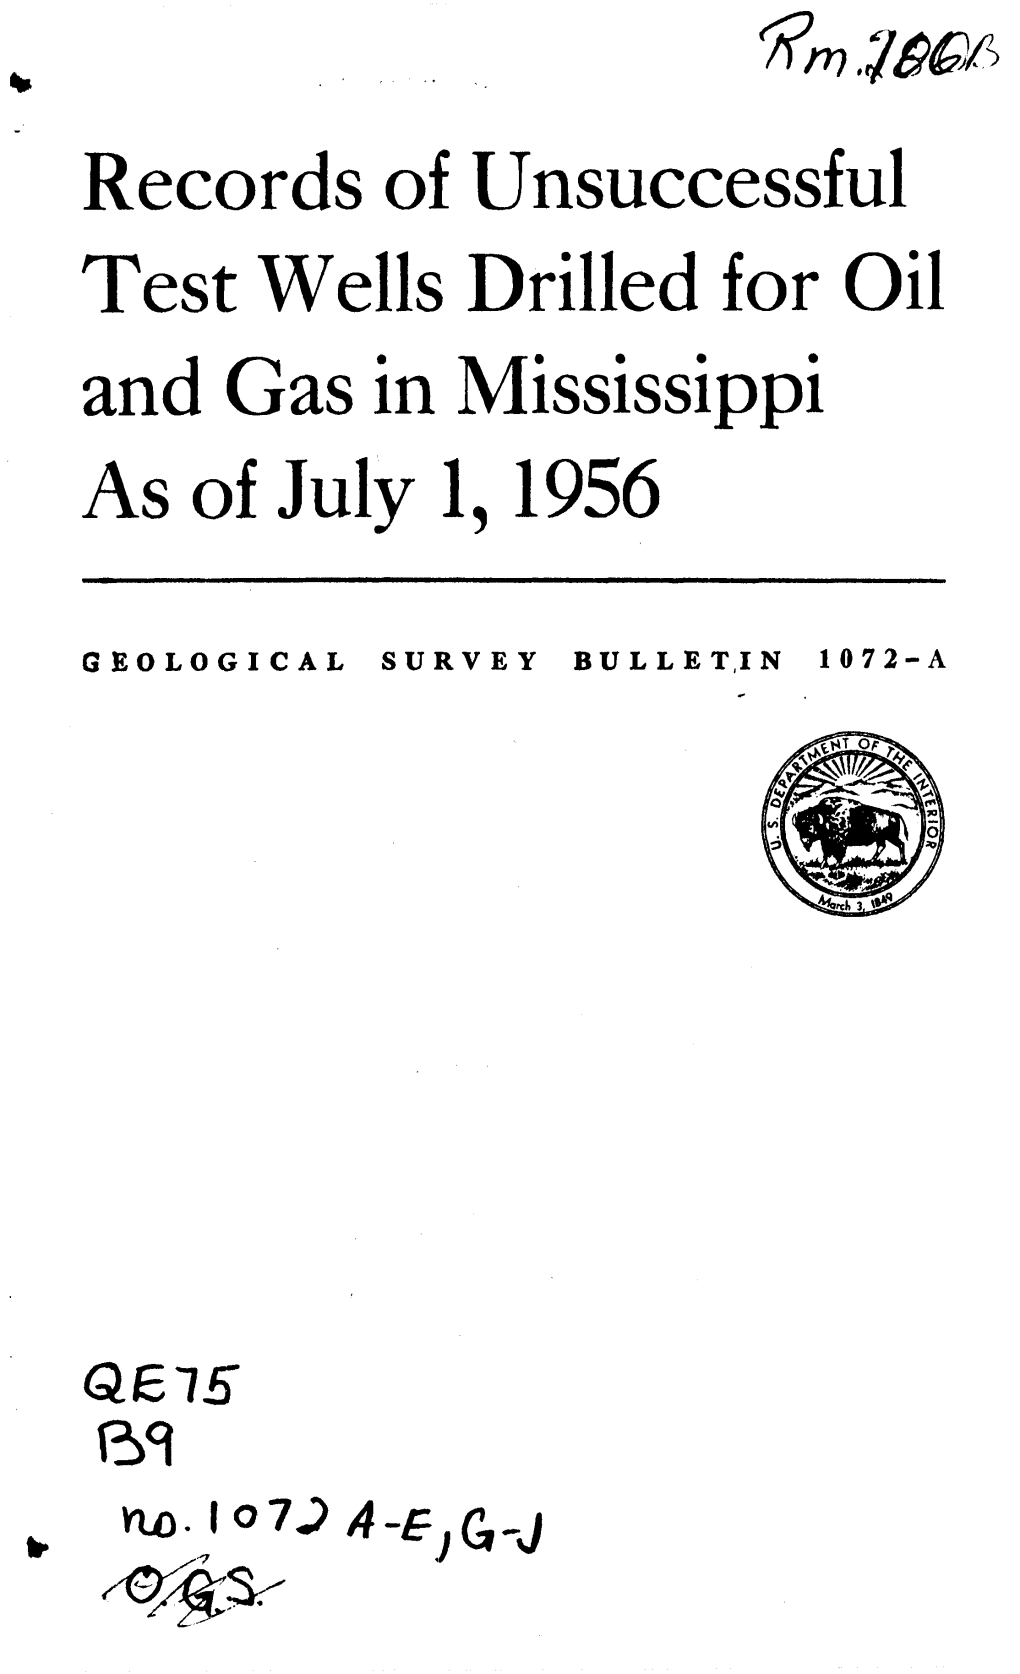 Records of Unsuccessful Test Wells Drilled for Oil and Gas in Mississippi As of July 1, 1956